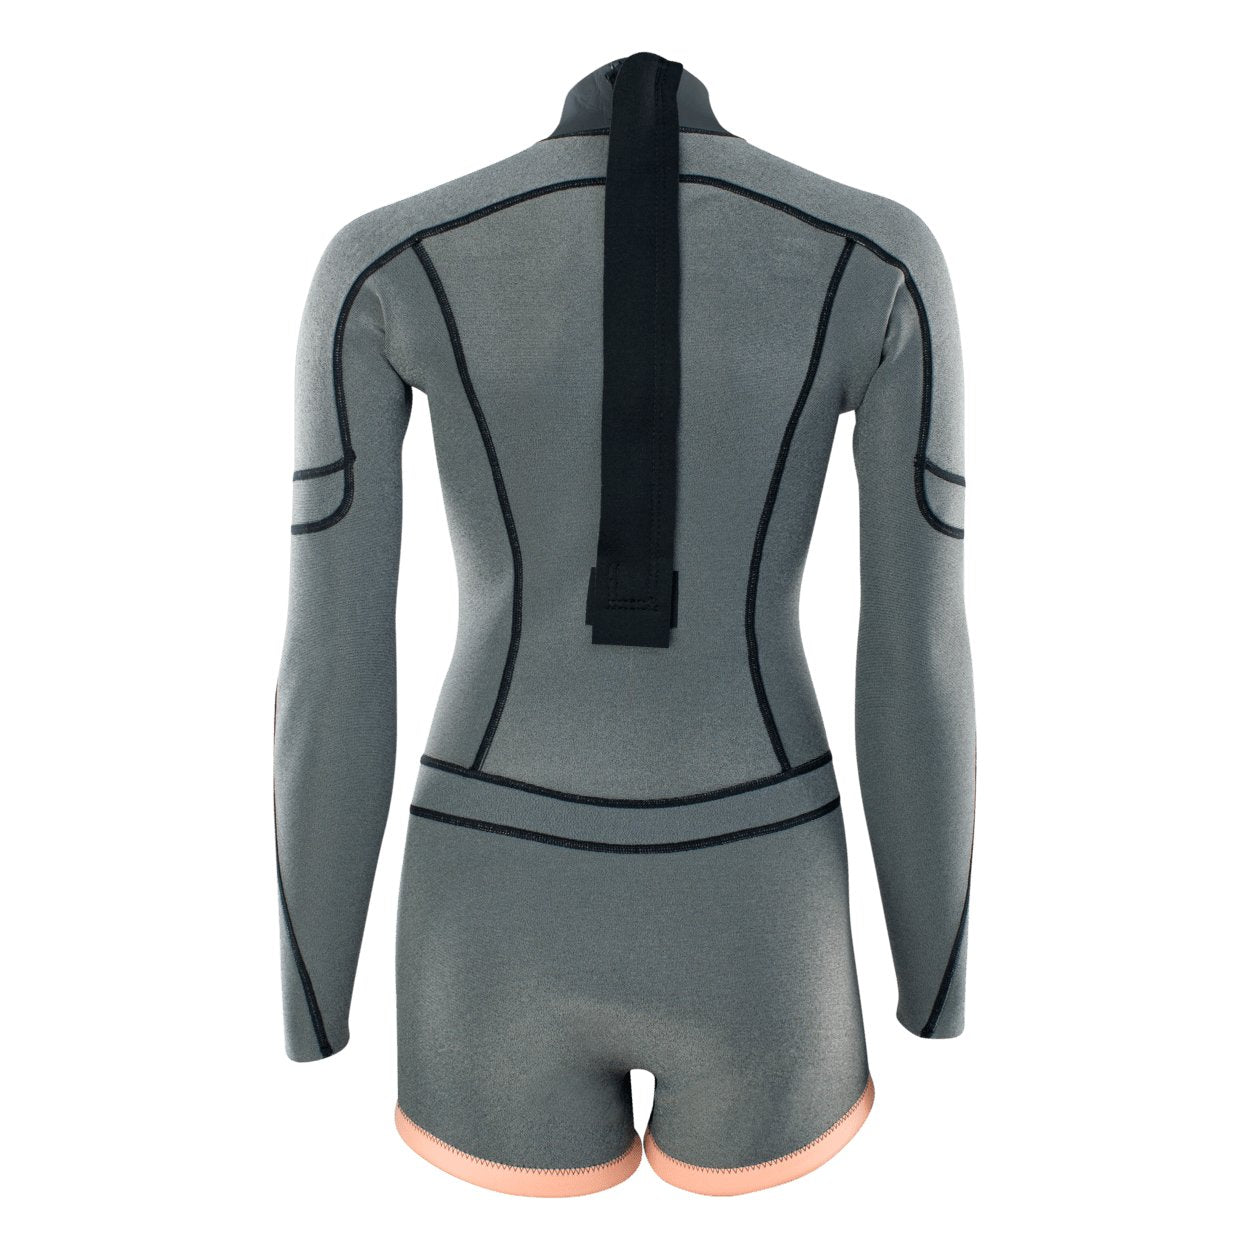 ION Amaze Shorty 2.0 LS Back Zip 2022 - Worthing Watersports - 9010583058429 - Wetsuits - ION Water